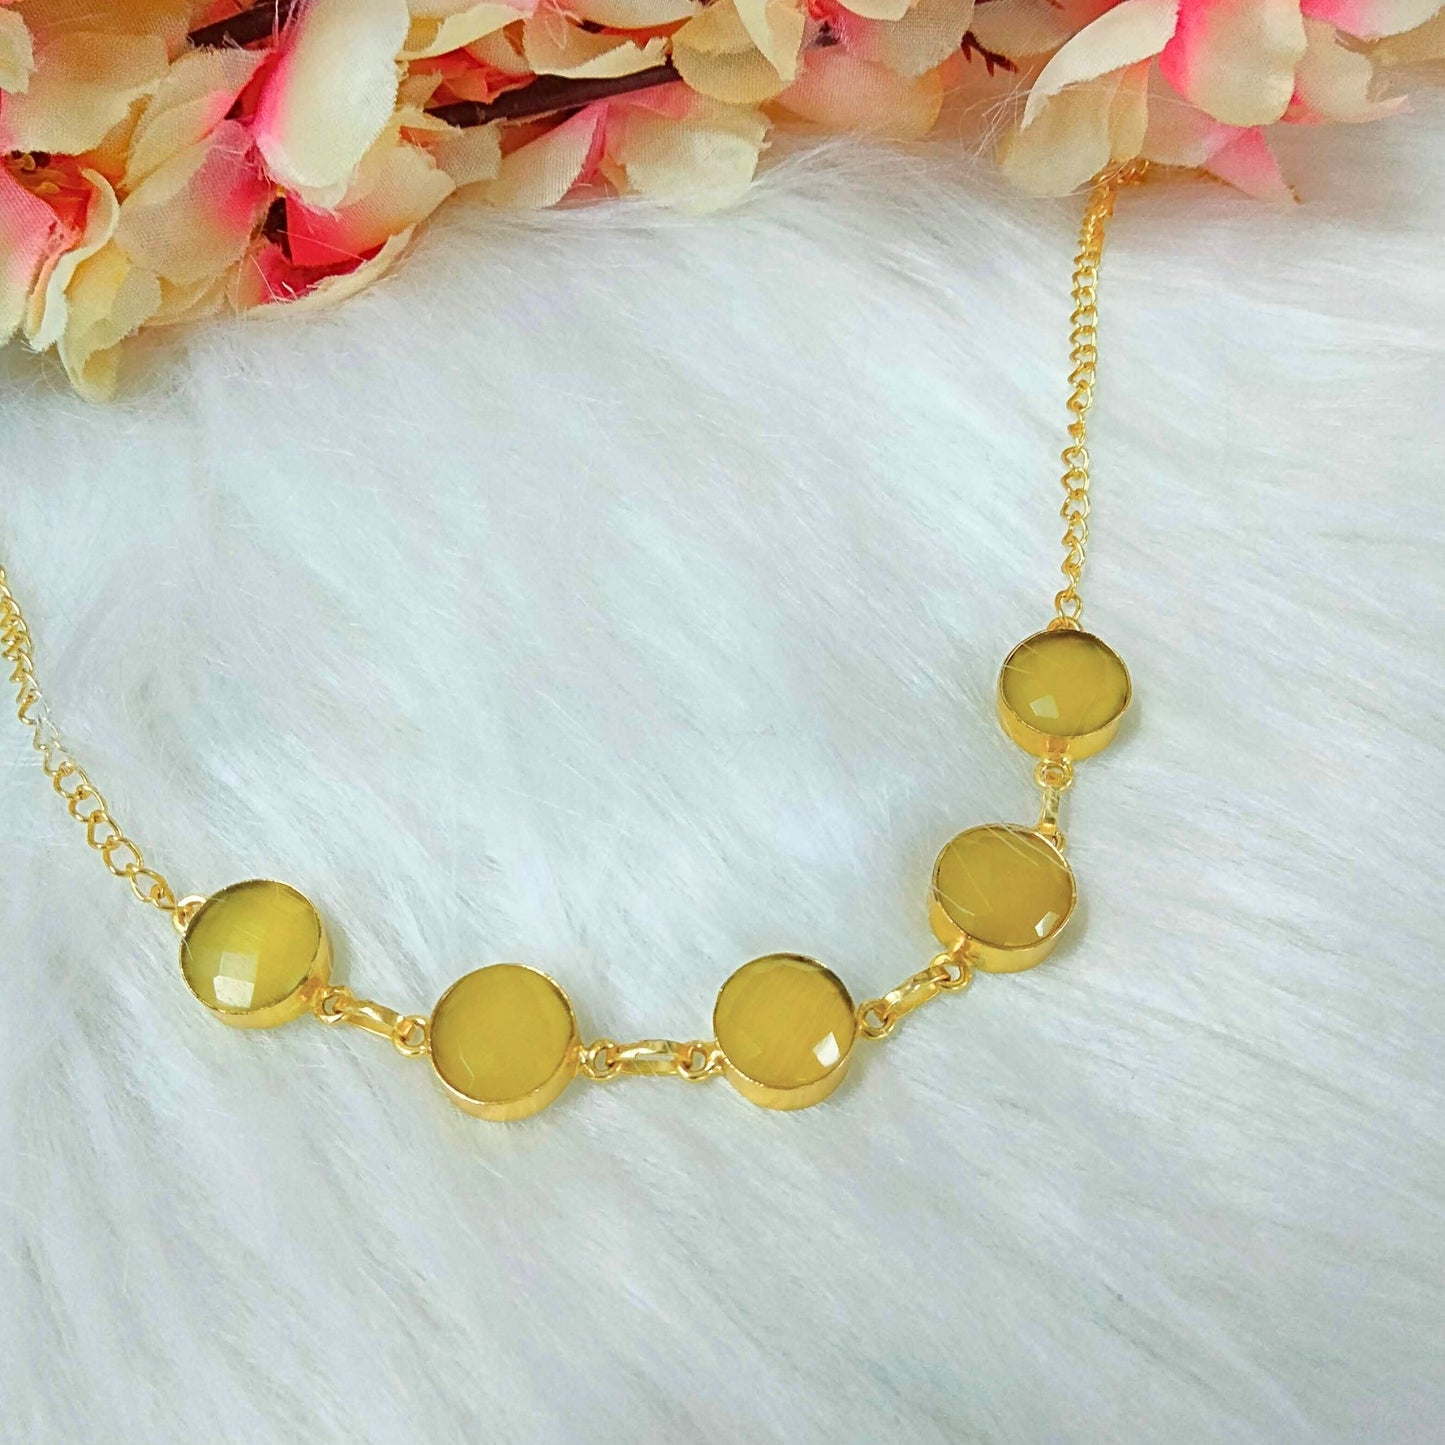 Bdiva 18K Gold Plated Five Stone Yellow Citrine Necklace.